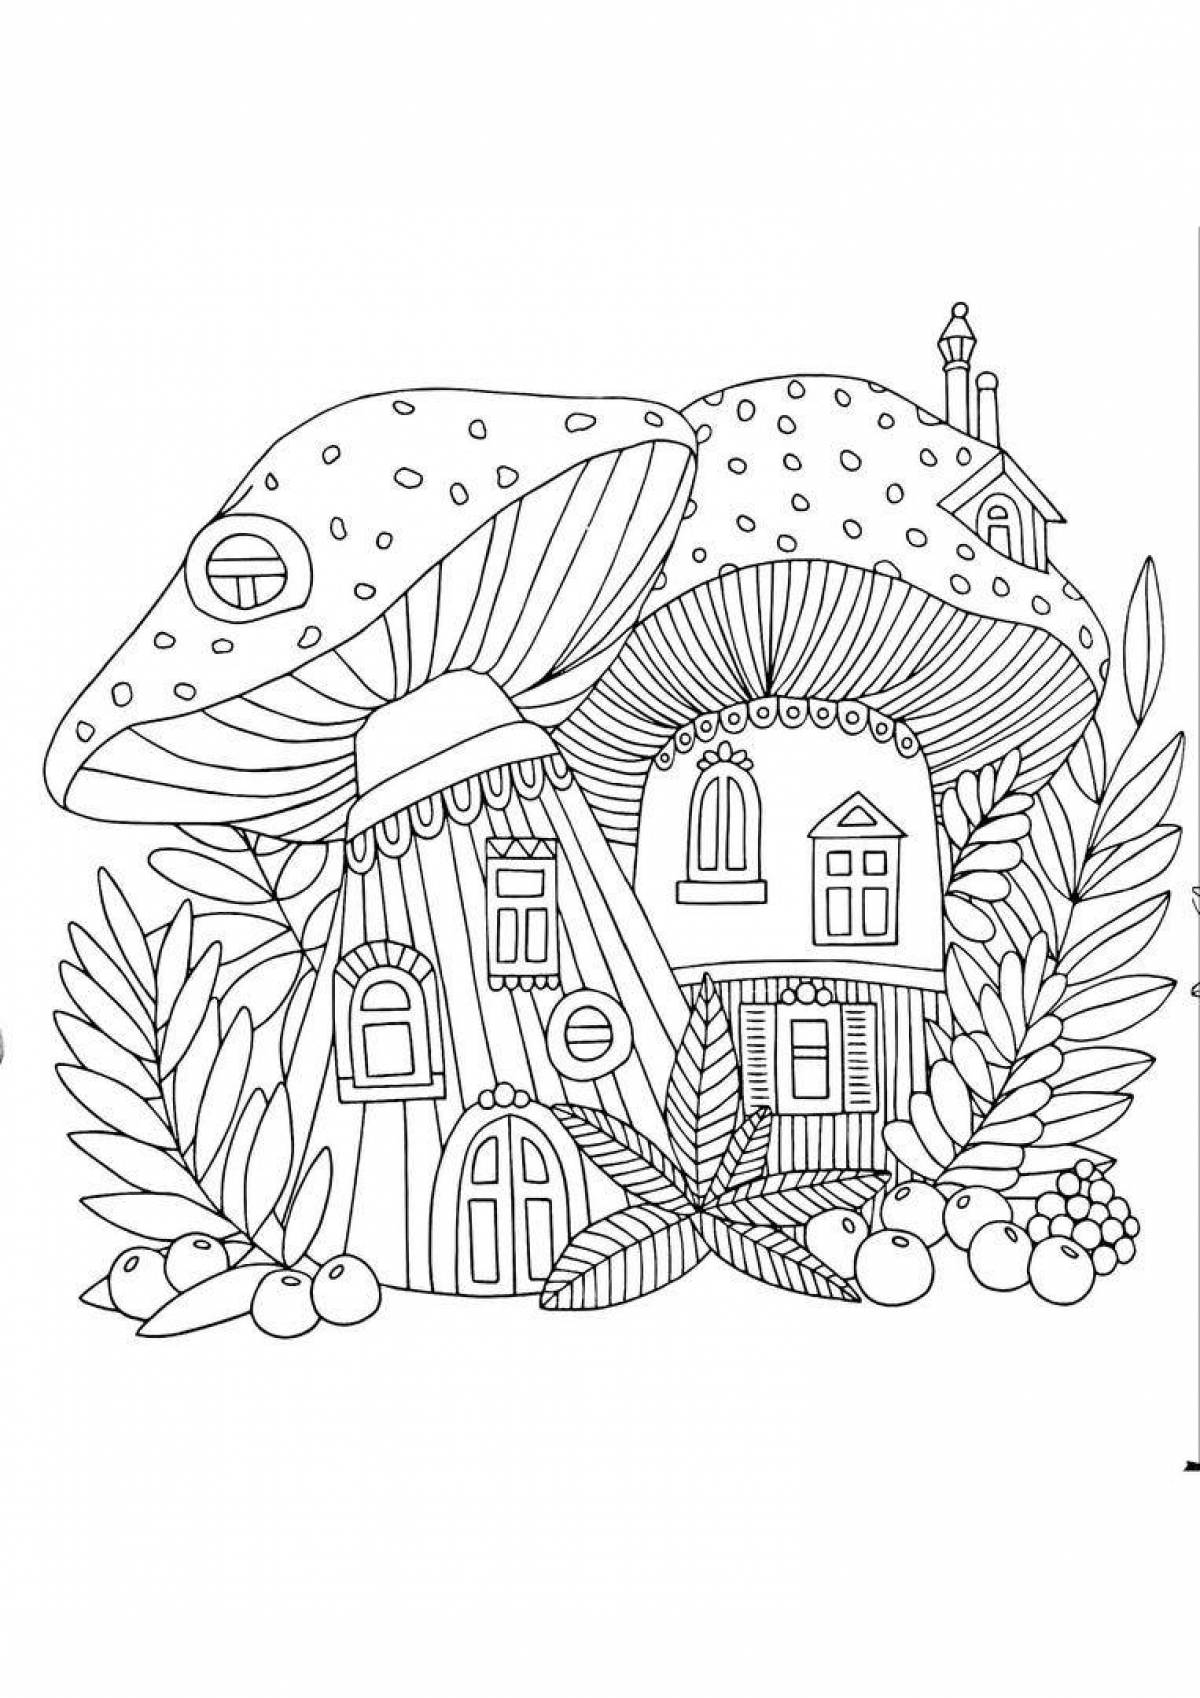 Coloring book luxury house in junland